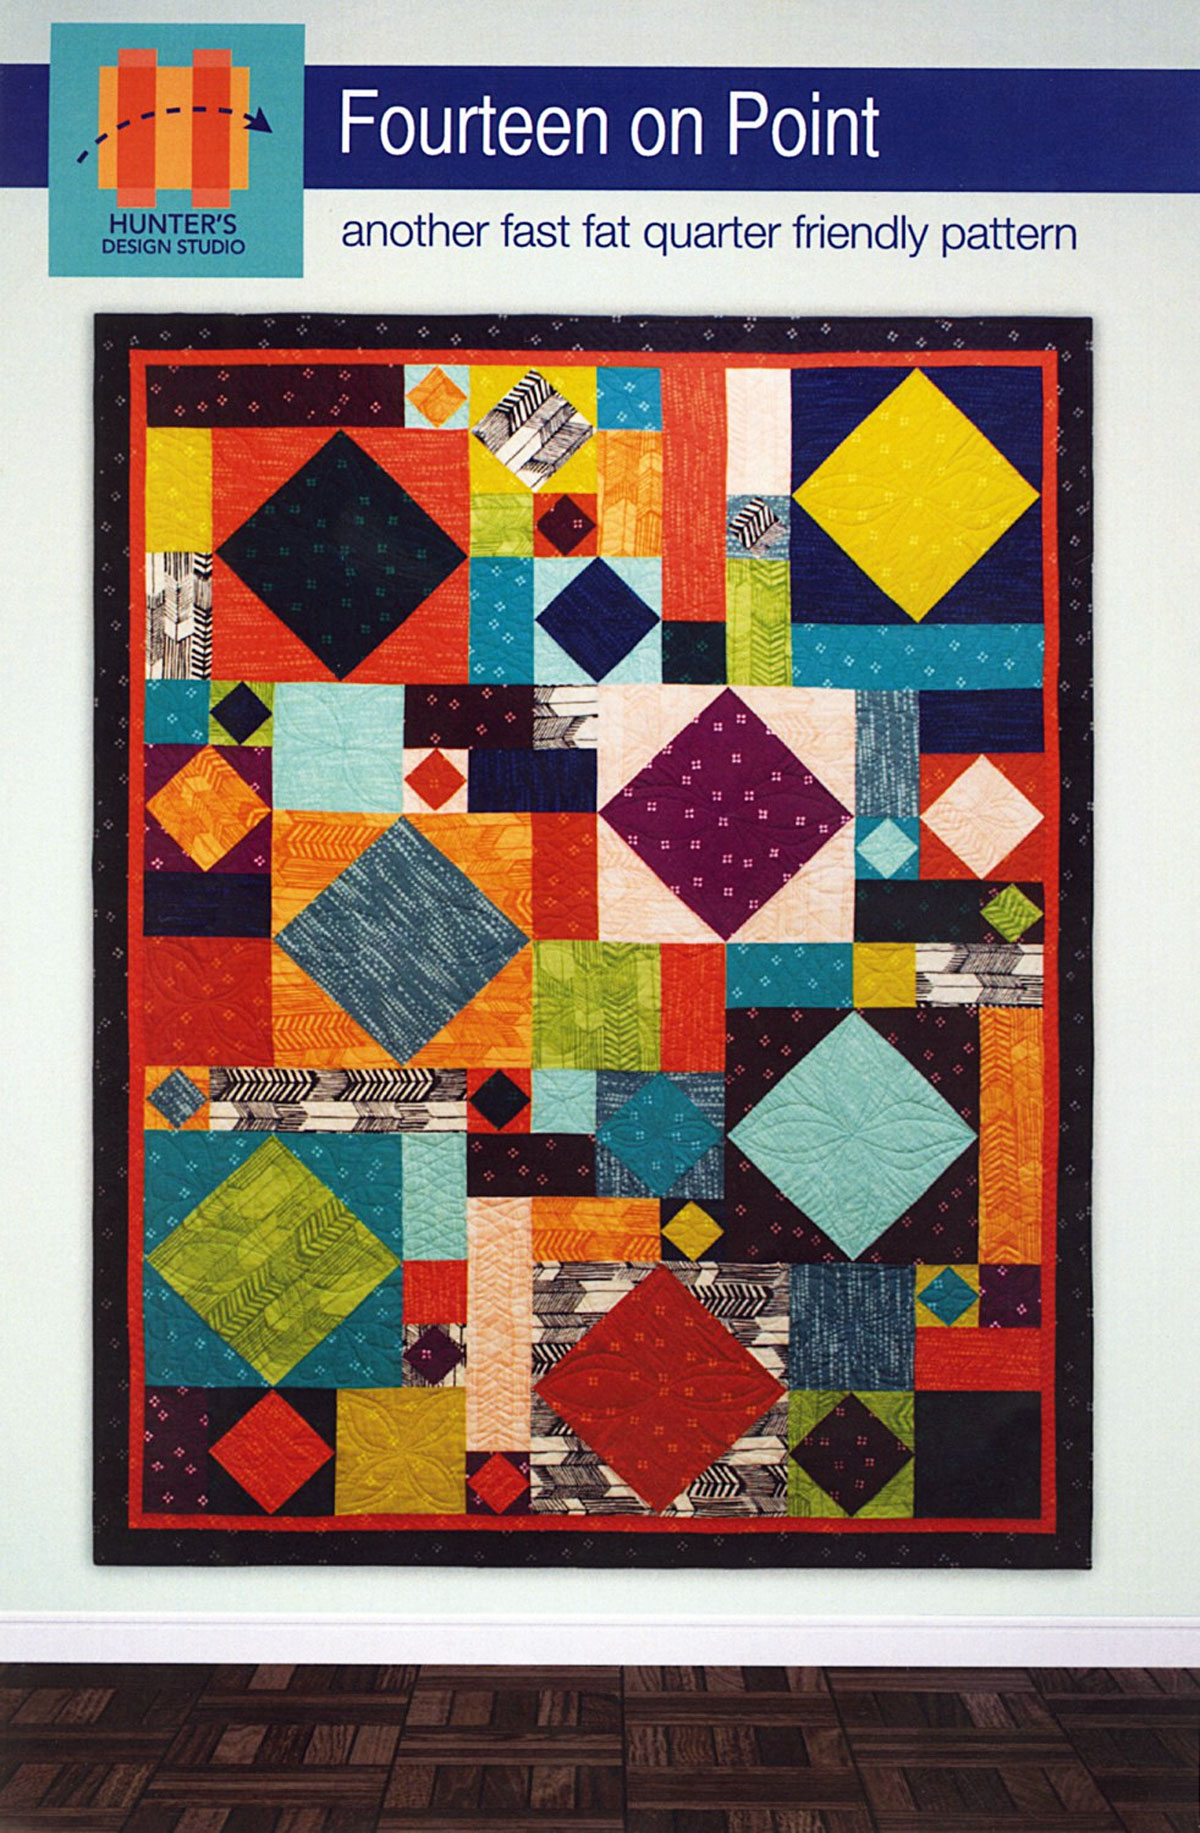 Fourteen-On-Point-quilt-sewing-pattern-Hunters-Design-Studio-front